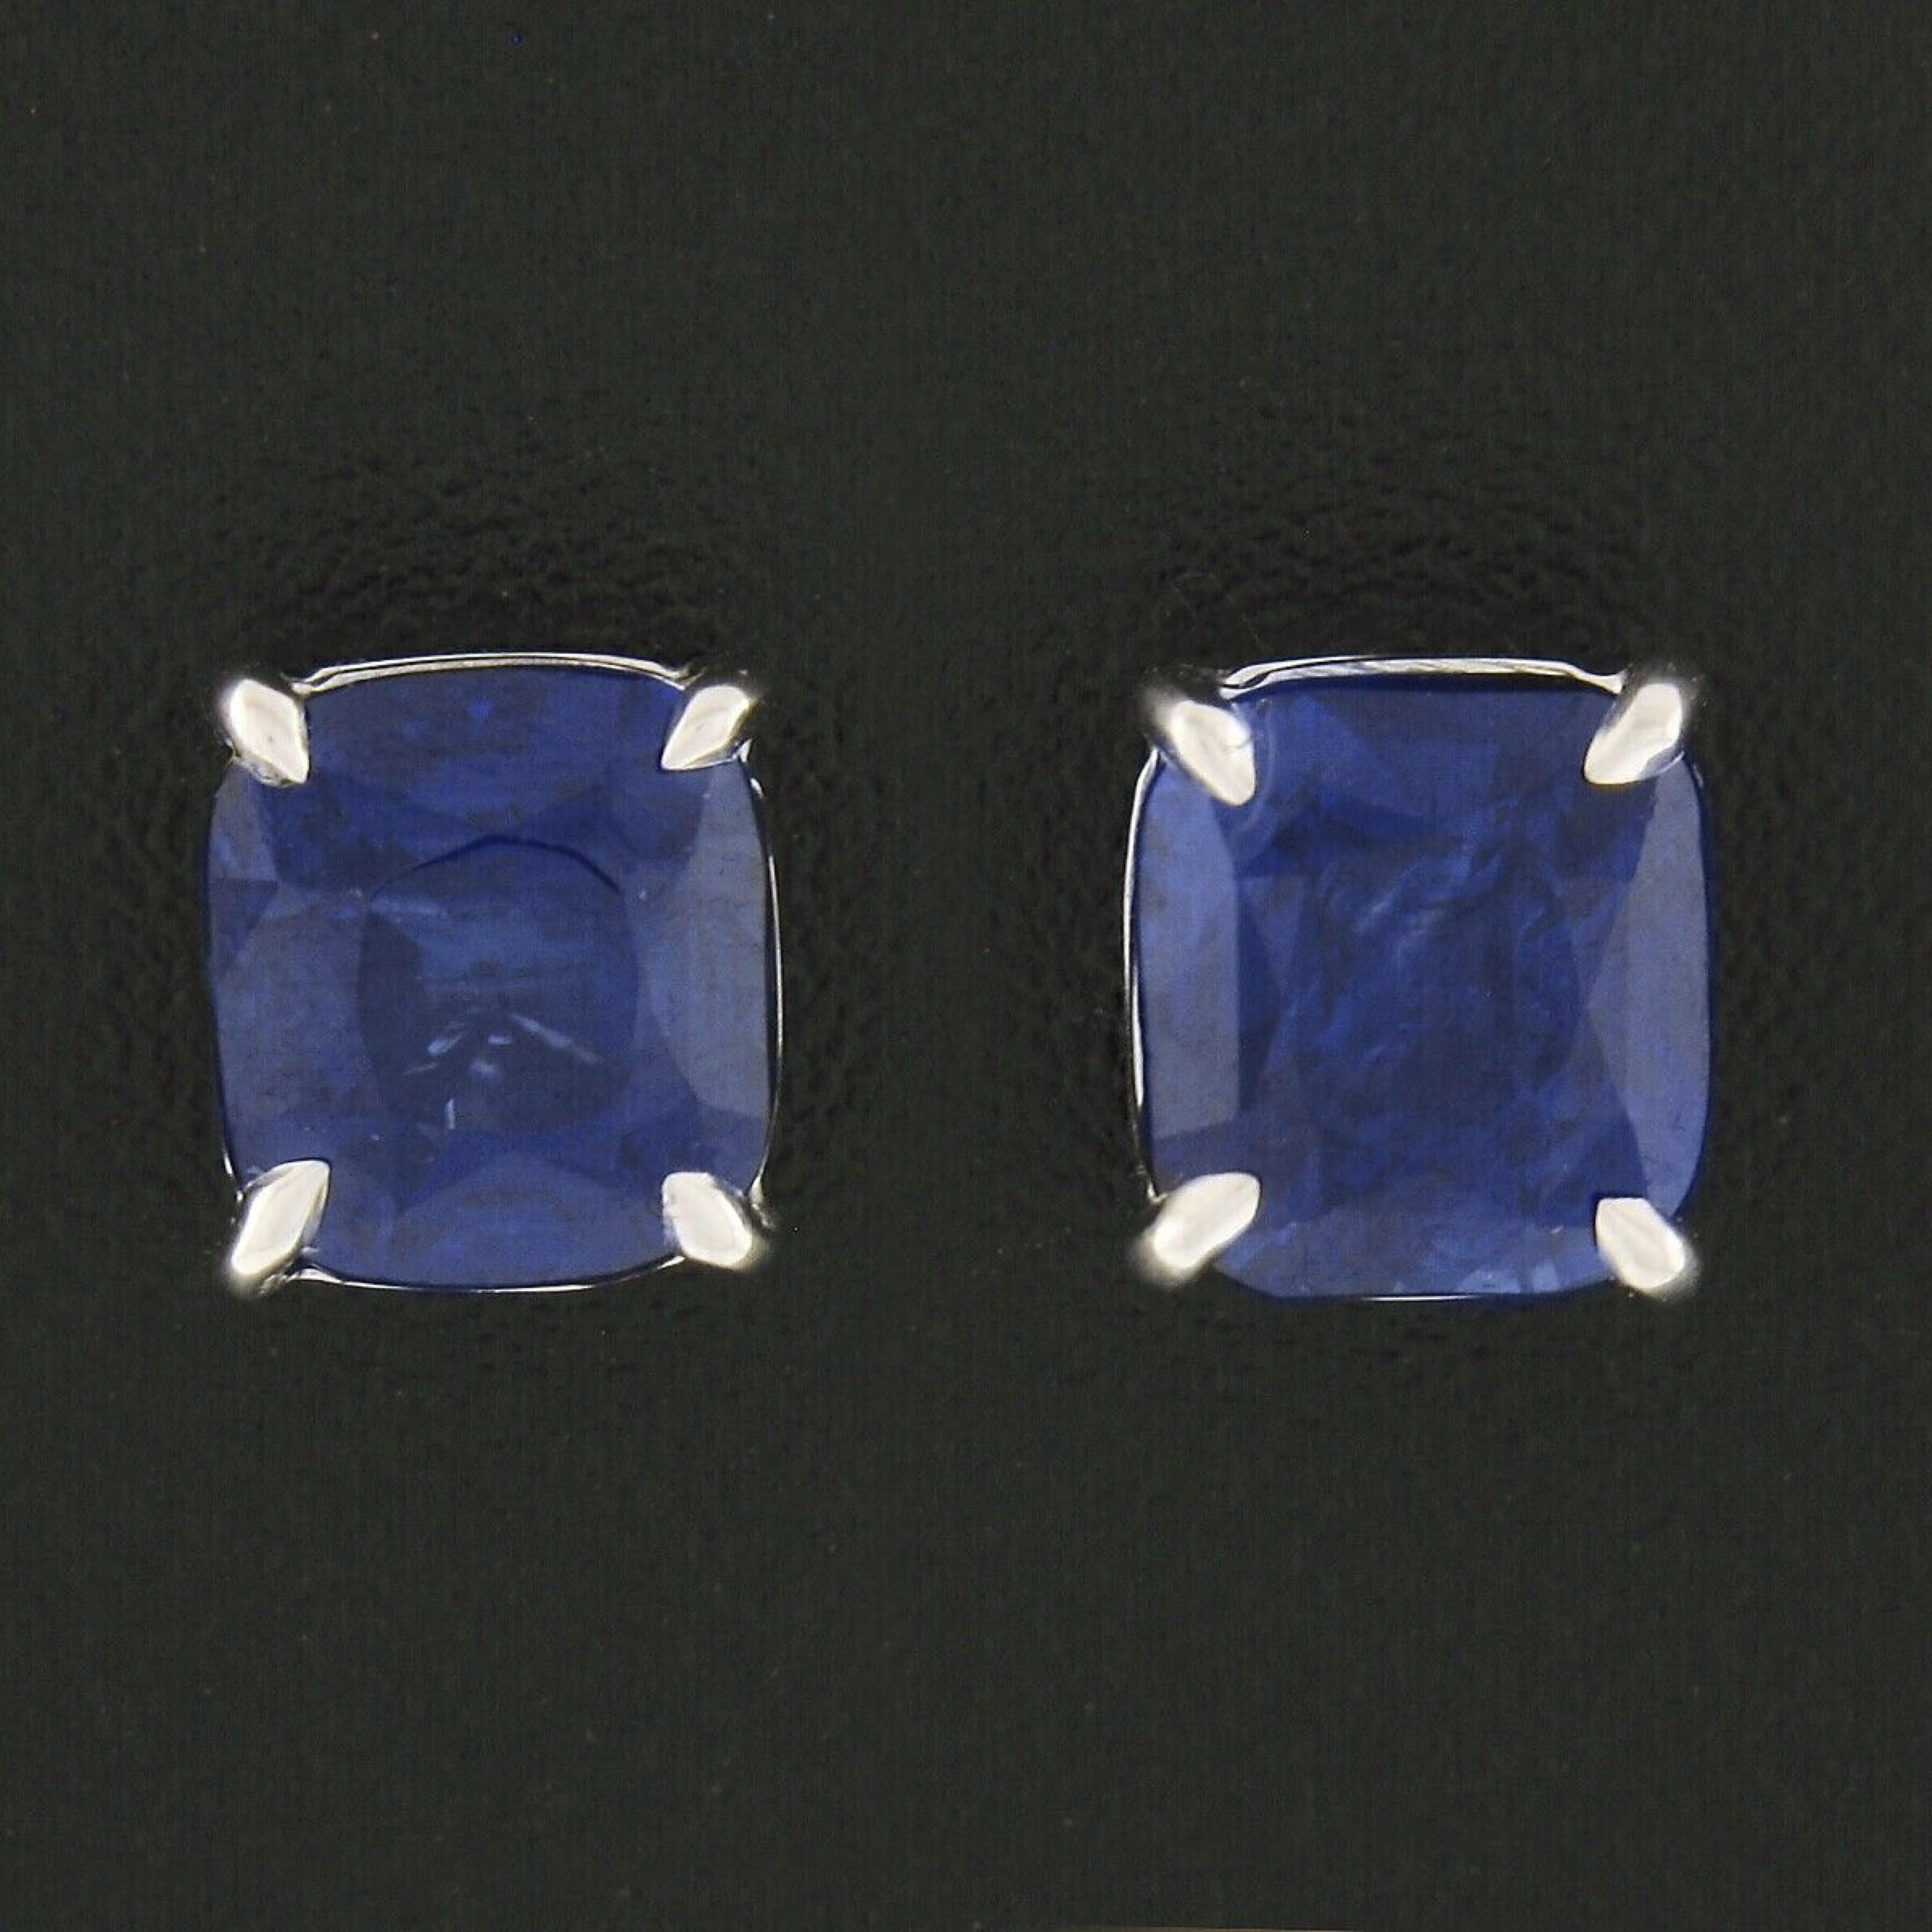 You are looking at beautiful brand new pair of sapphire stud earrings solidly and very well crafted in 18k white gold. The sapphire stones are both GIA certified with a cushion brilliant cut and total exactly 3.21 carats in weight. They are neatly